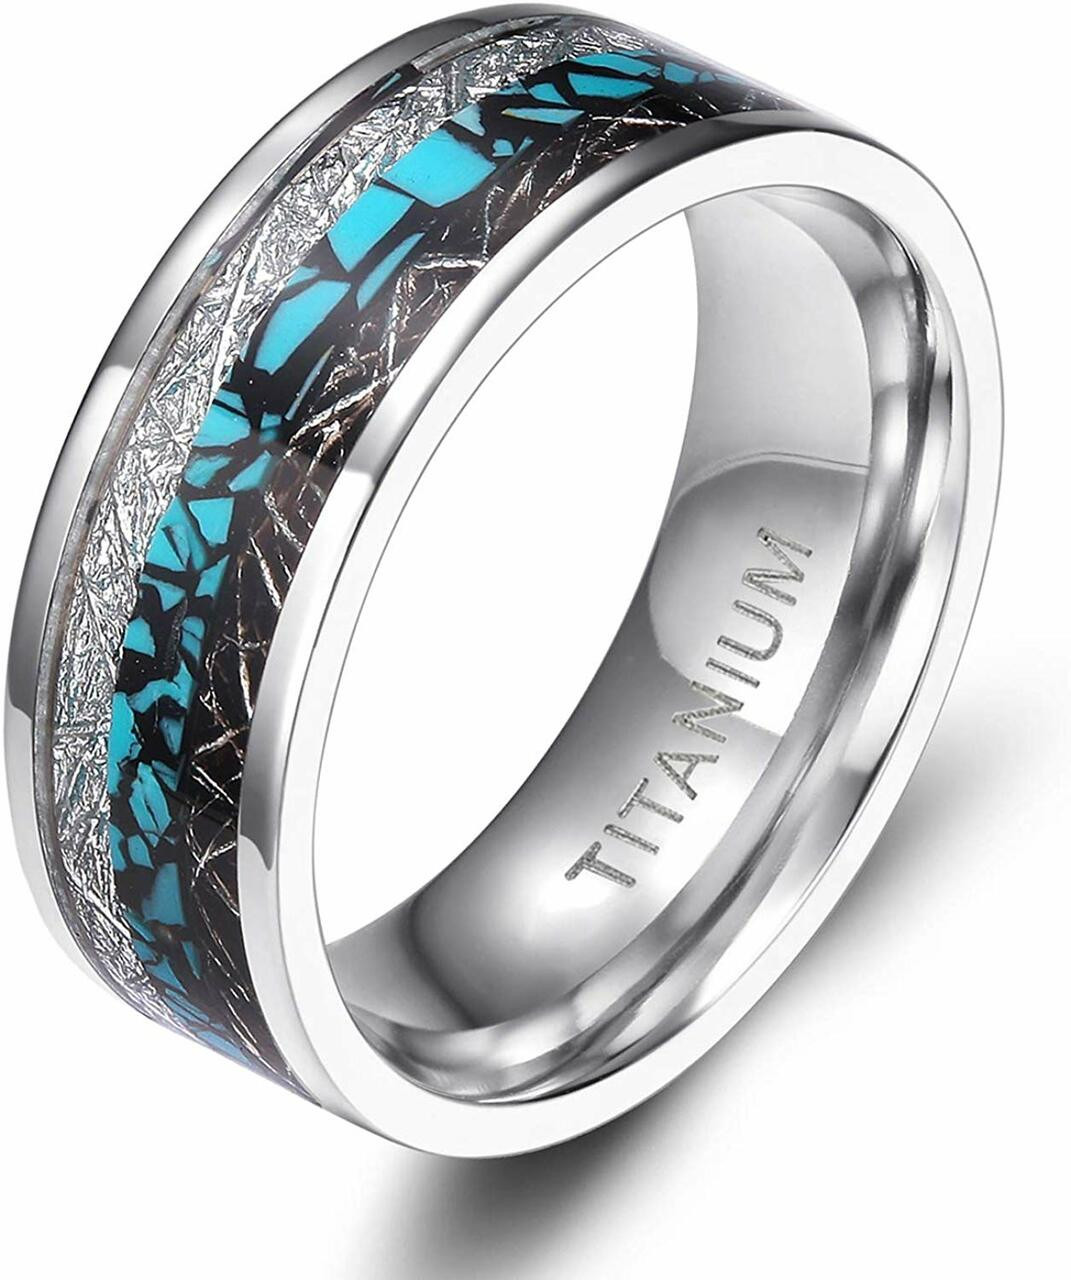 Men's Titanium Wedding Bands (8mm). Silver and Tri Color - Titanium Ring with Turquoise and Double Inspired Meteorite Inlay. Comfort Fit Light Weight